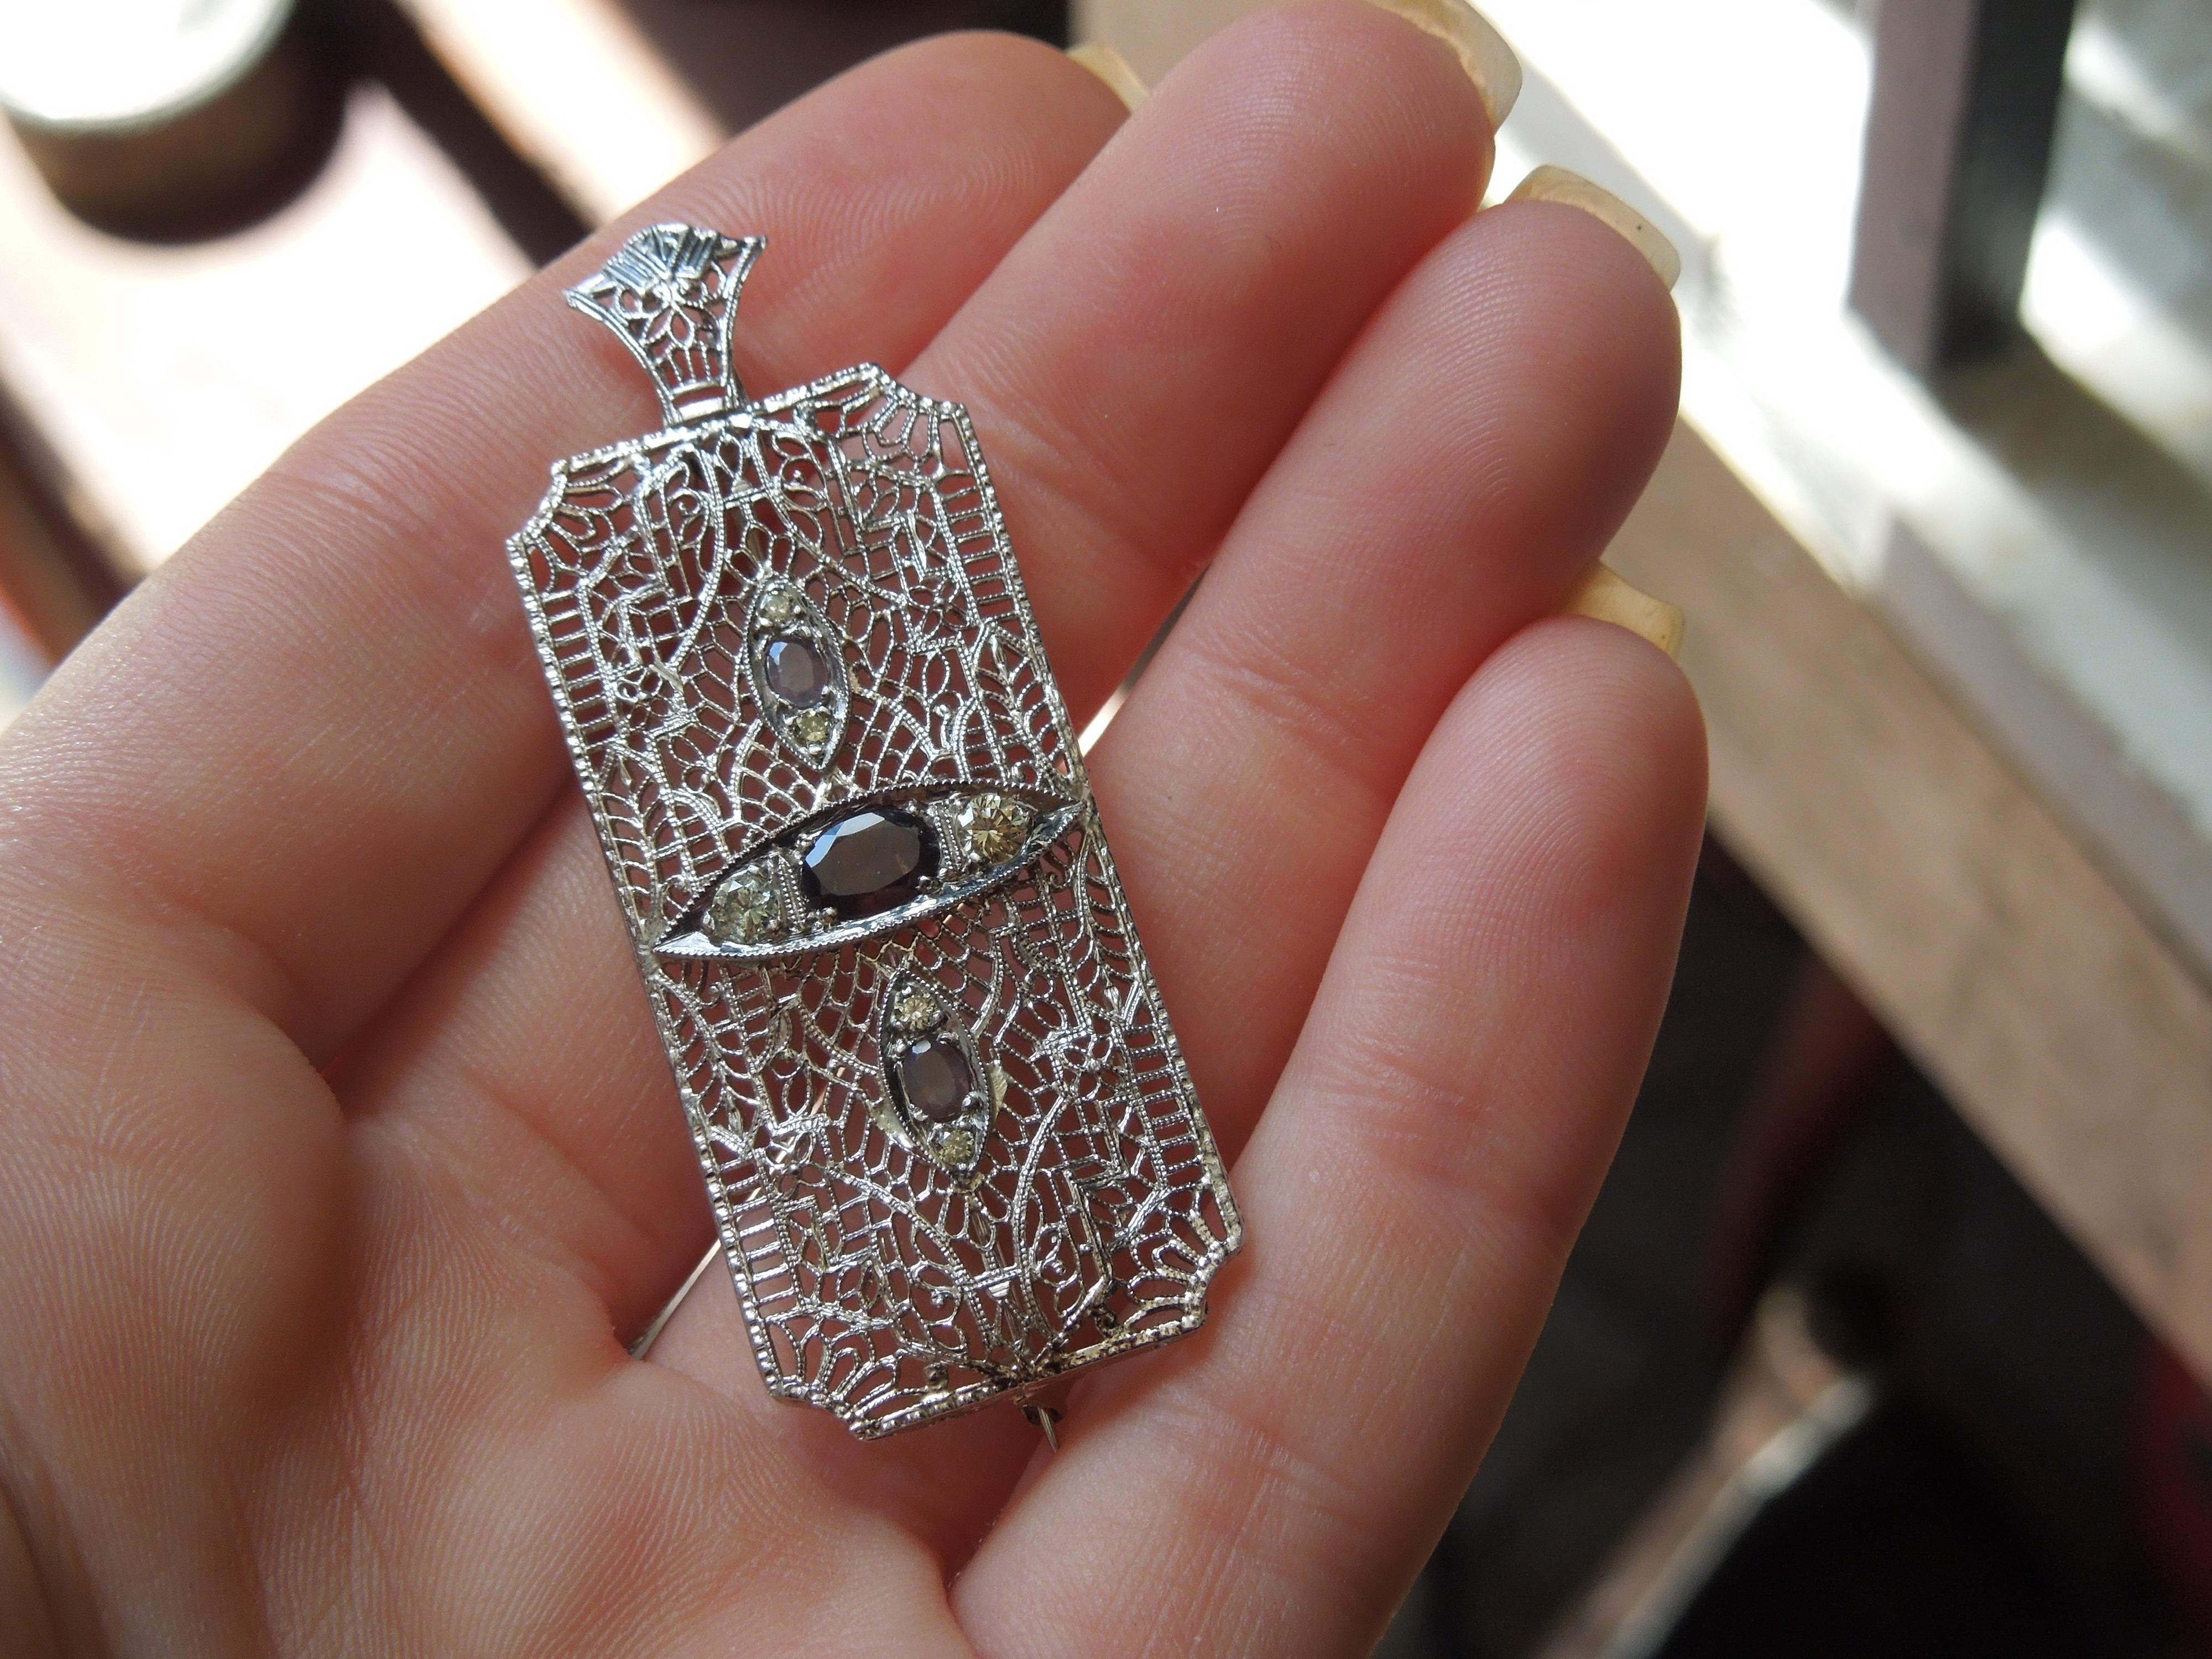 Antique Circa 1910

Constructed completely of 14 Karat White Gold with intricate Filigree work throughout, as well as a Bale added at a later time.
To be worn as a Pendant, or a Pin/Brooch if desired.

Containing 3 Genuine Earth-Mined Oval cut